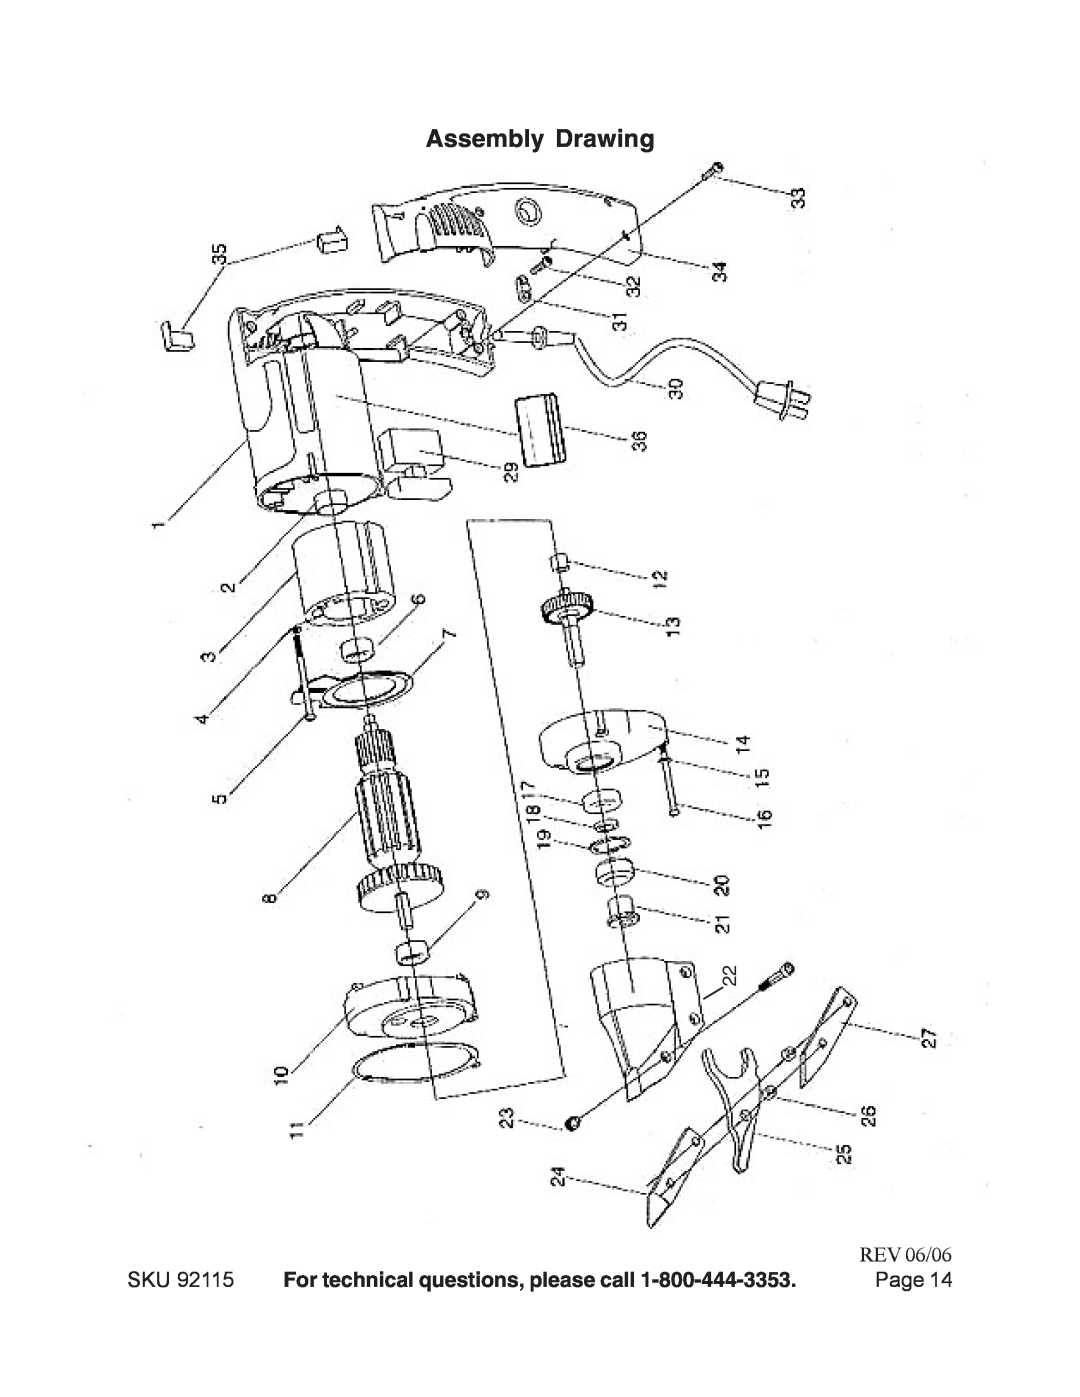 Harbor Freight Tools 92115 manual Assembly Drawing, Page, REV 06/06, For technical questions, please call 